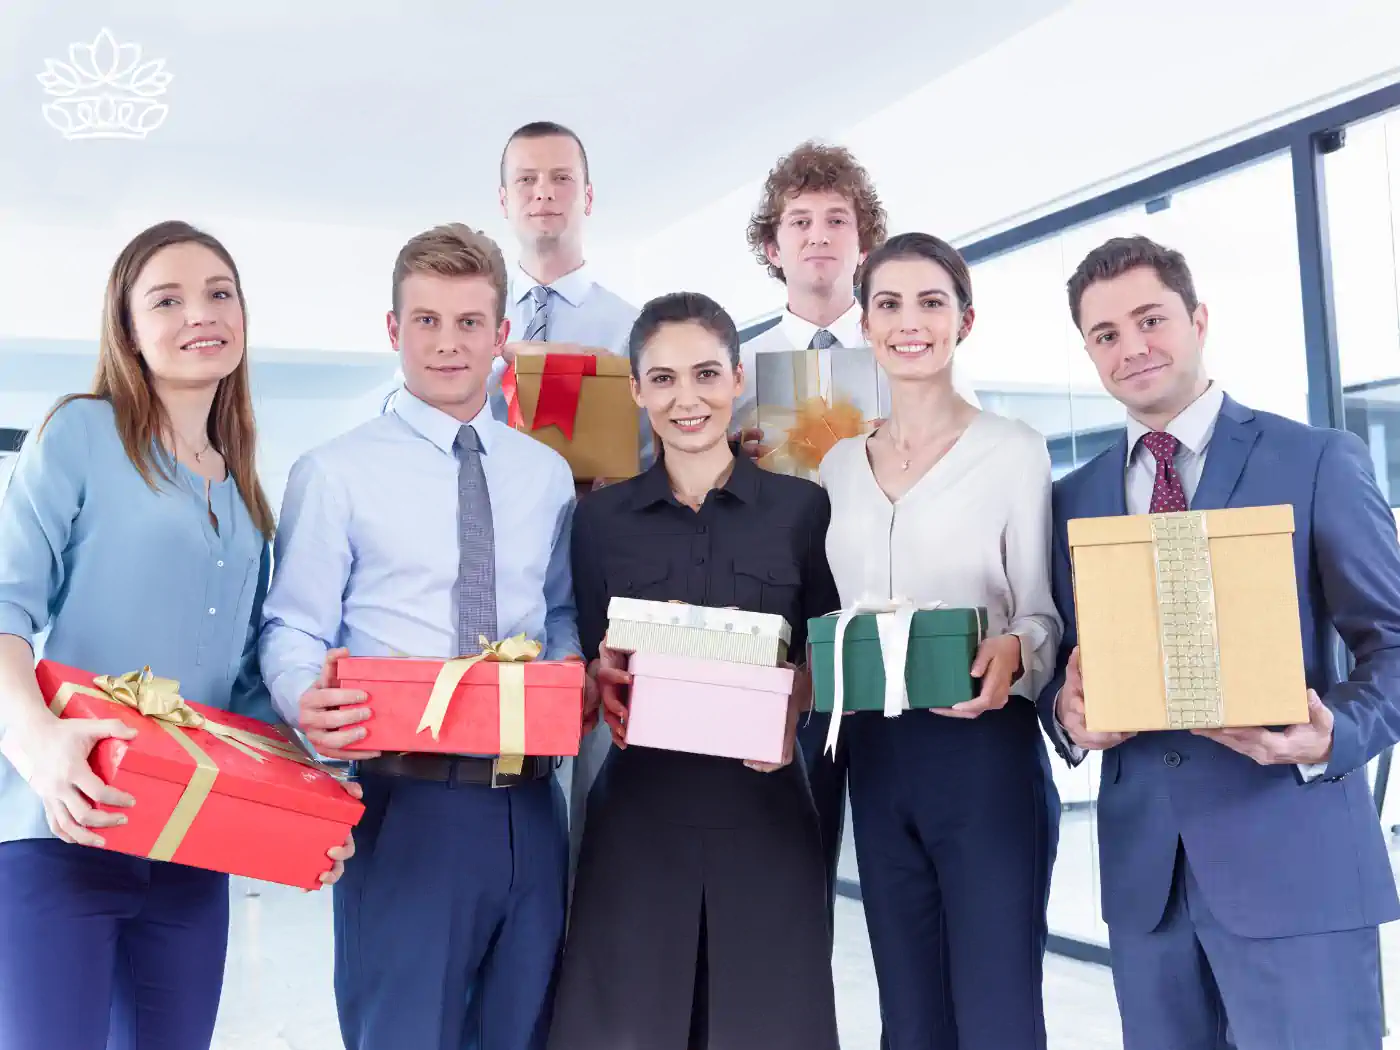 A diverse group of six professional colleagues, smiling and holding various brightly wrapped gifts in a modern office setting, exemplifying a culture of appreciation and teamwork. Fabulous Flowers and Gifts. Team Gifts. Delivered with Heart.